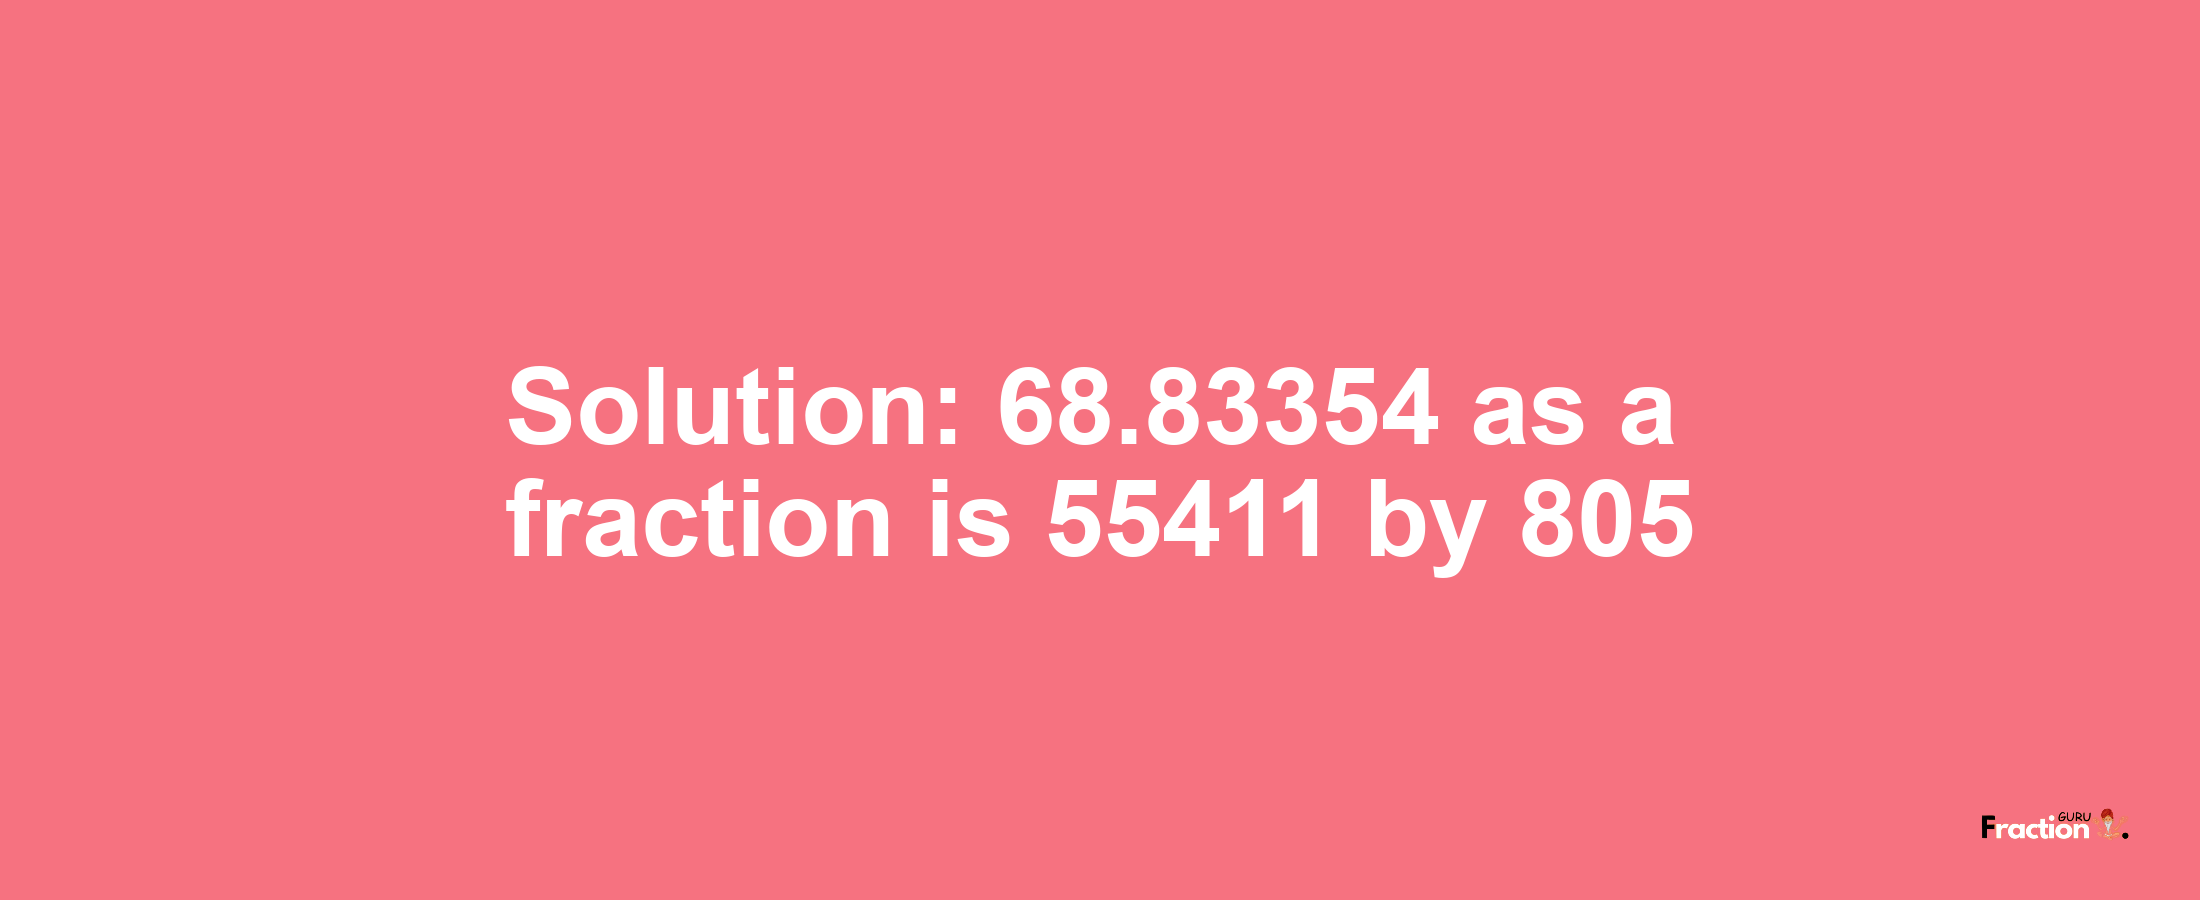 Solution:68.83354 as a fraction is 55411/805